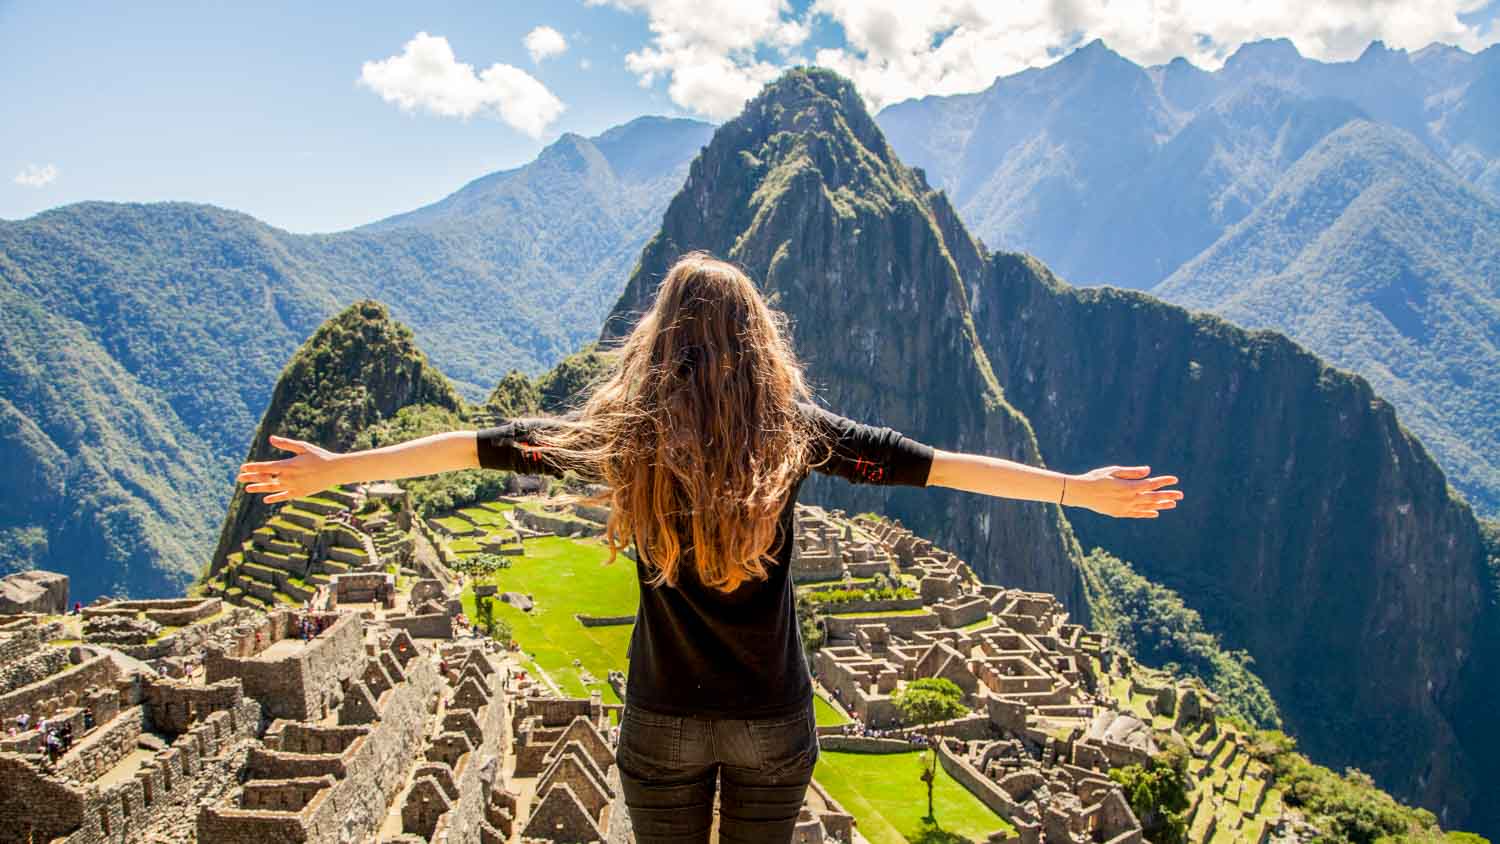 Amazing Machu Picchu Pictures & Backgrounds